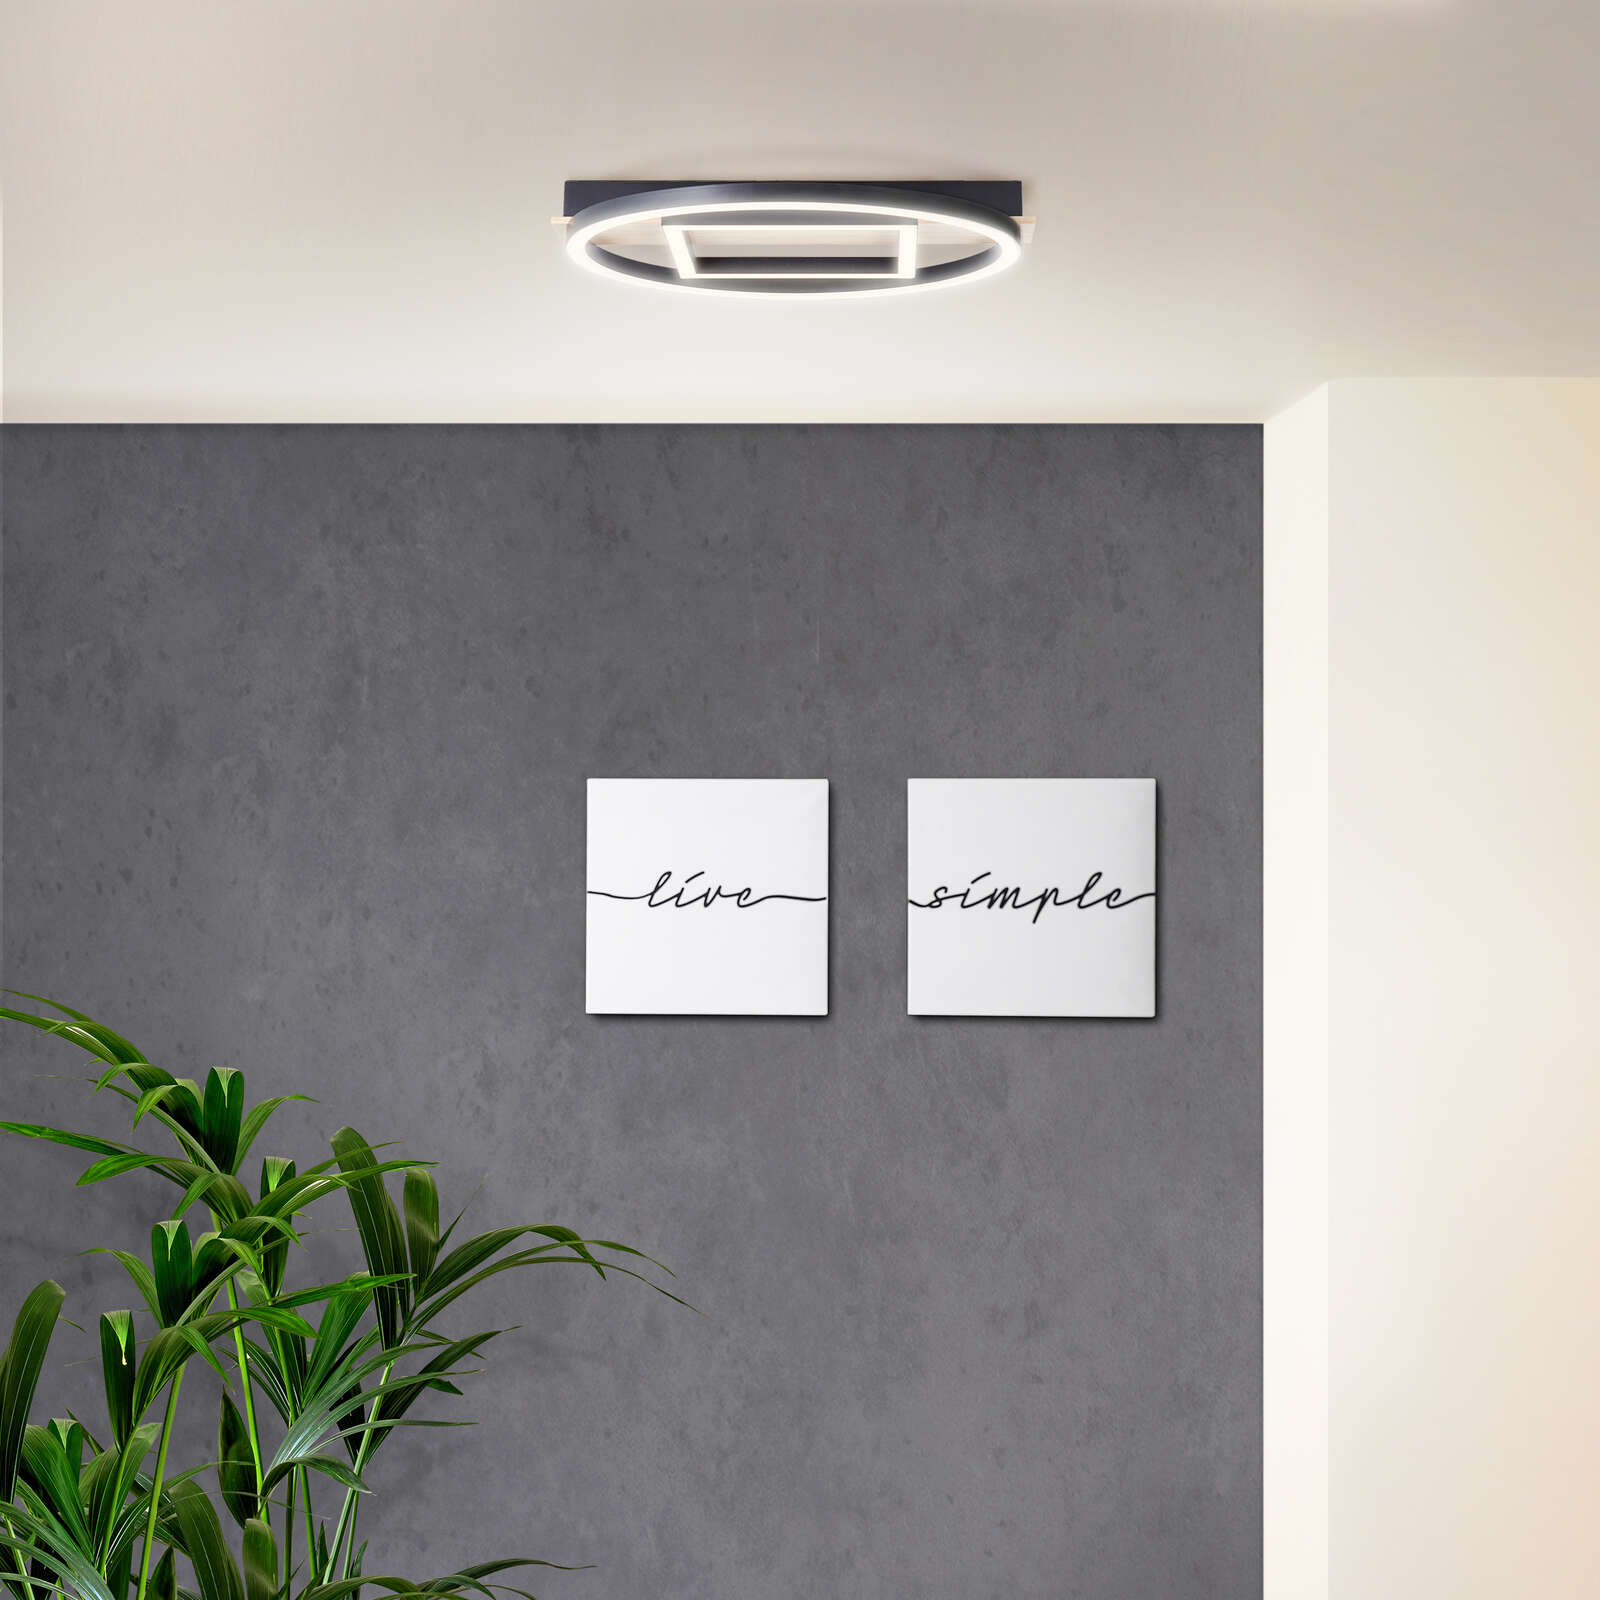             Wooden ceiling light - Leopold 3 - Brown
        